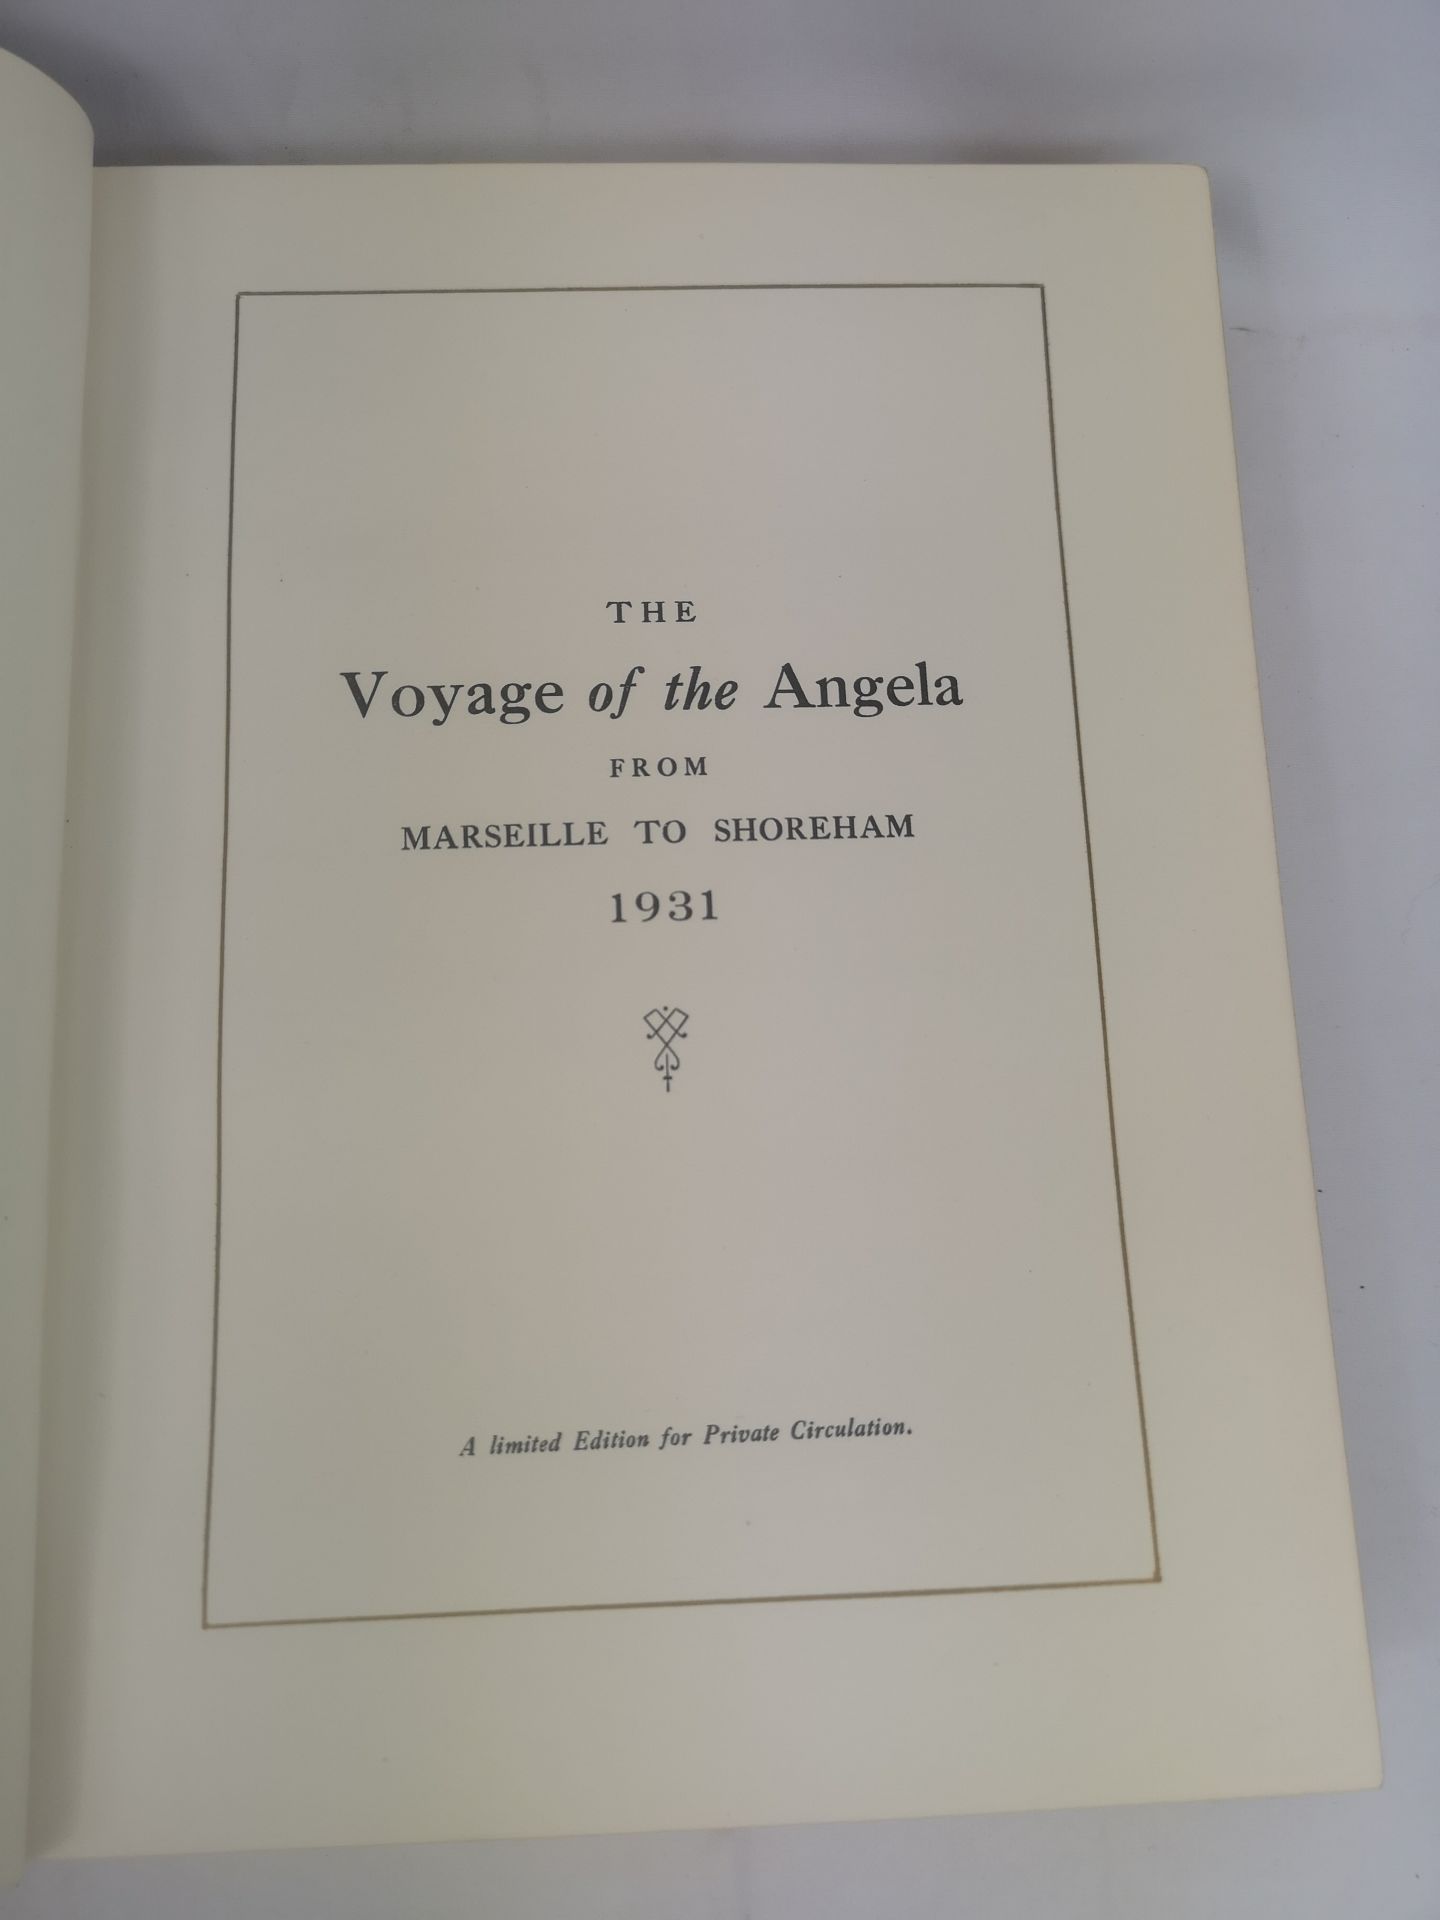 The Voyage of the Angela from Marseille to Shoreham 1931 - Image 4 of 7